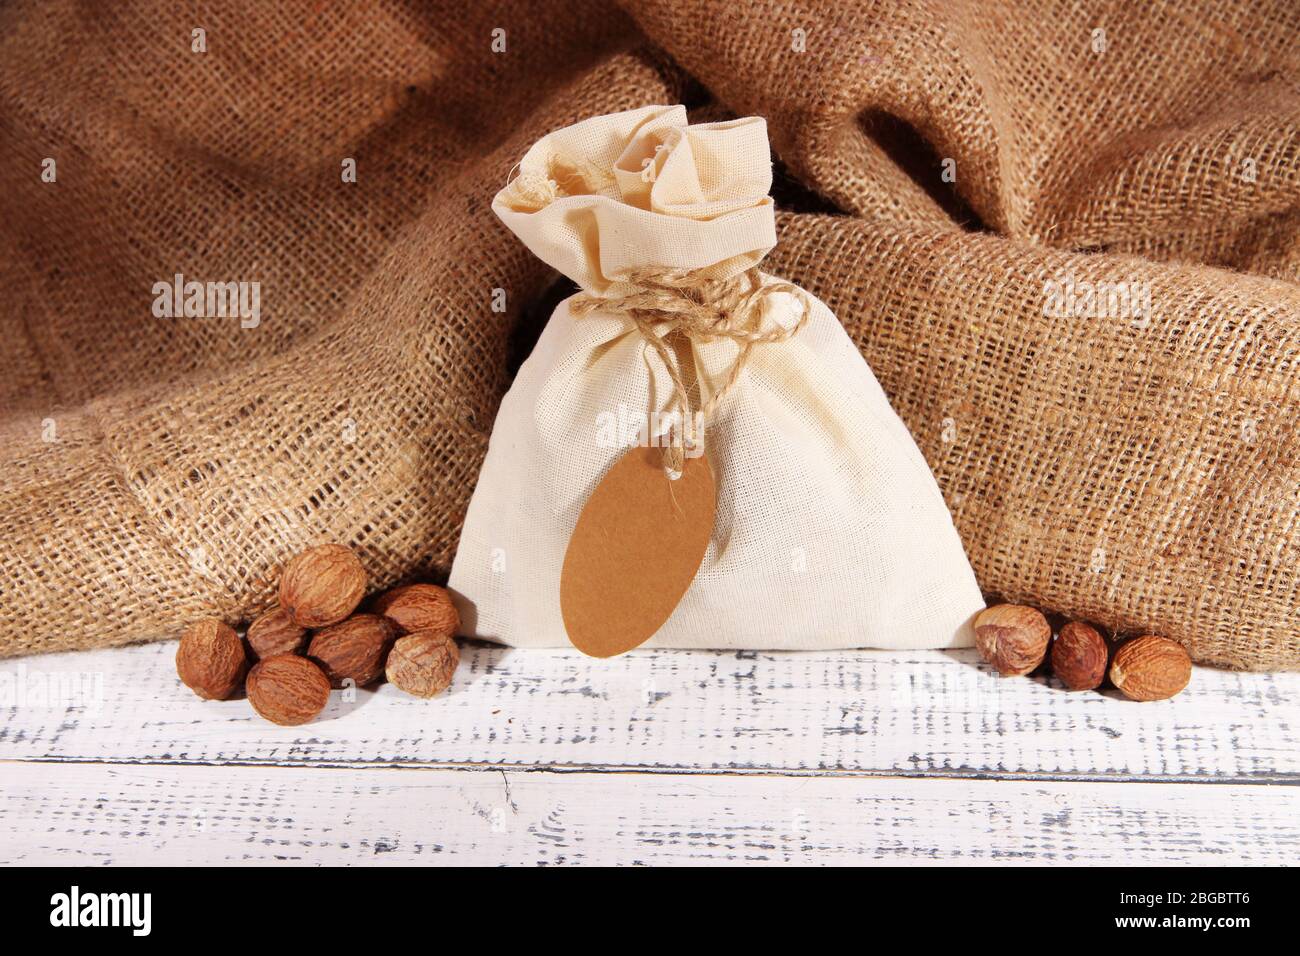 Sack full with spices, on wooden table, on sackcloth background Stock Photo